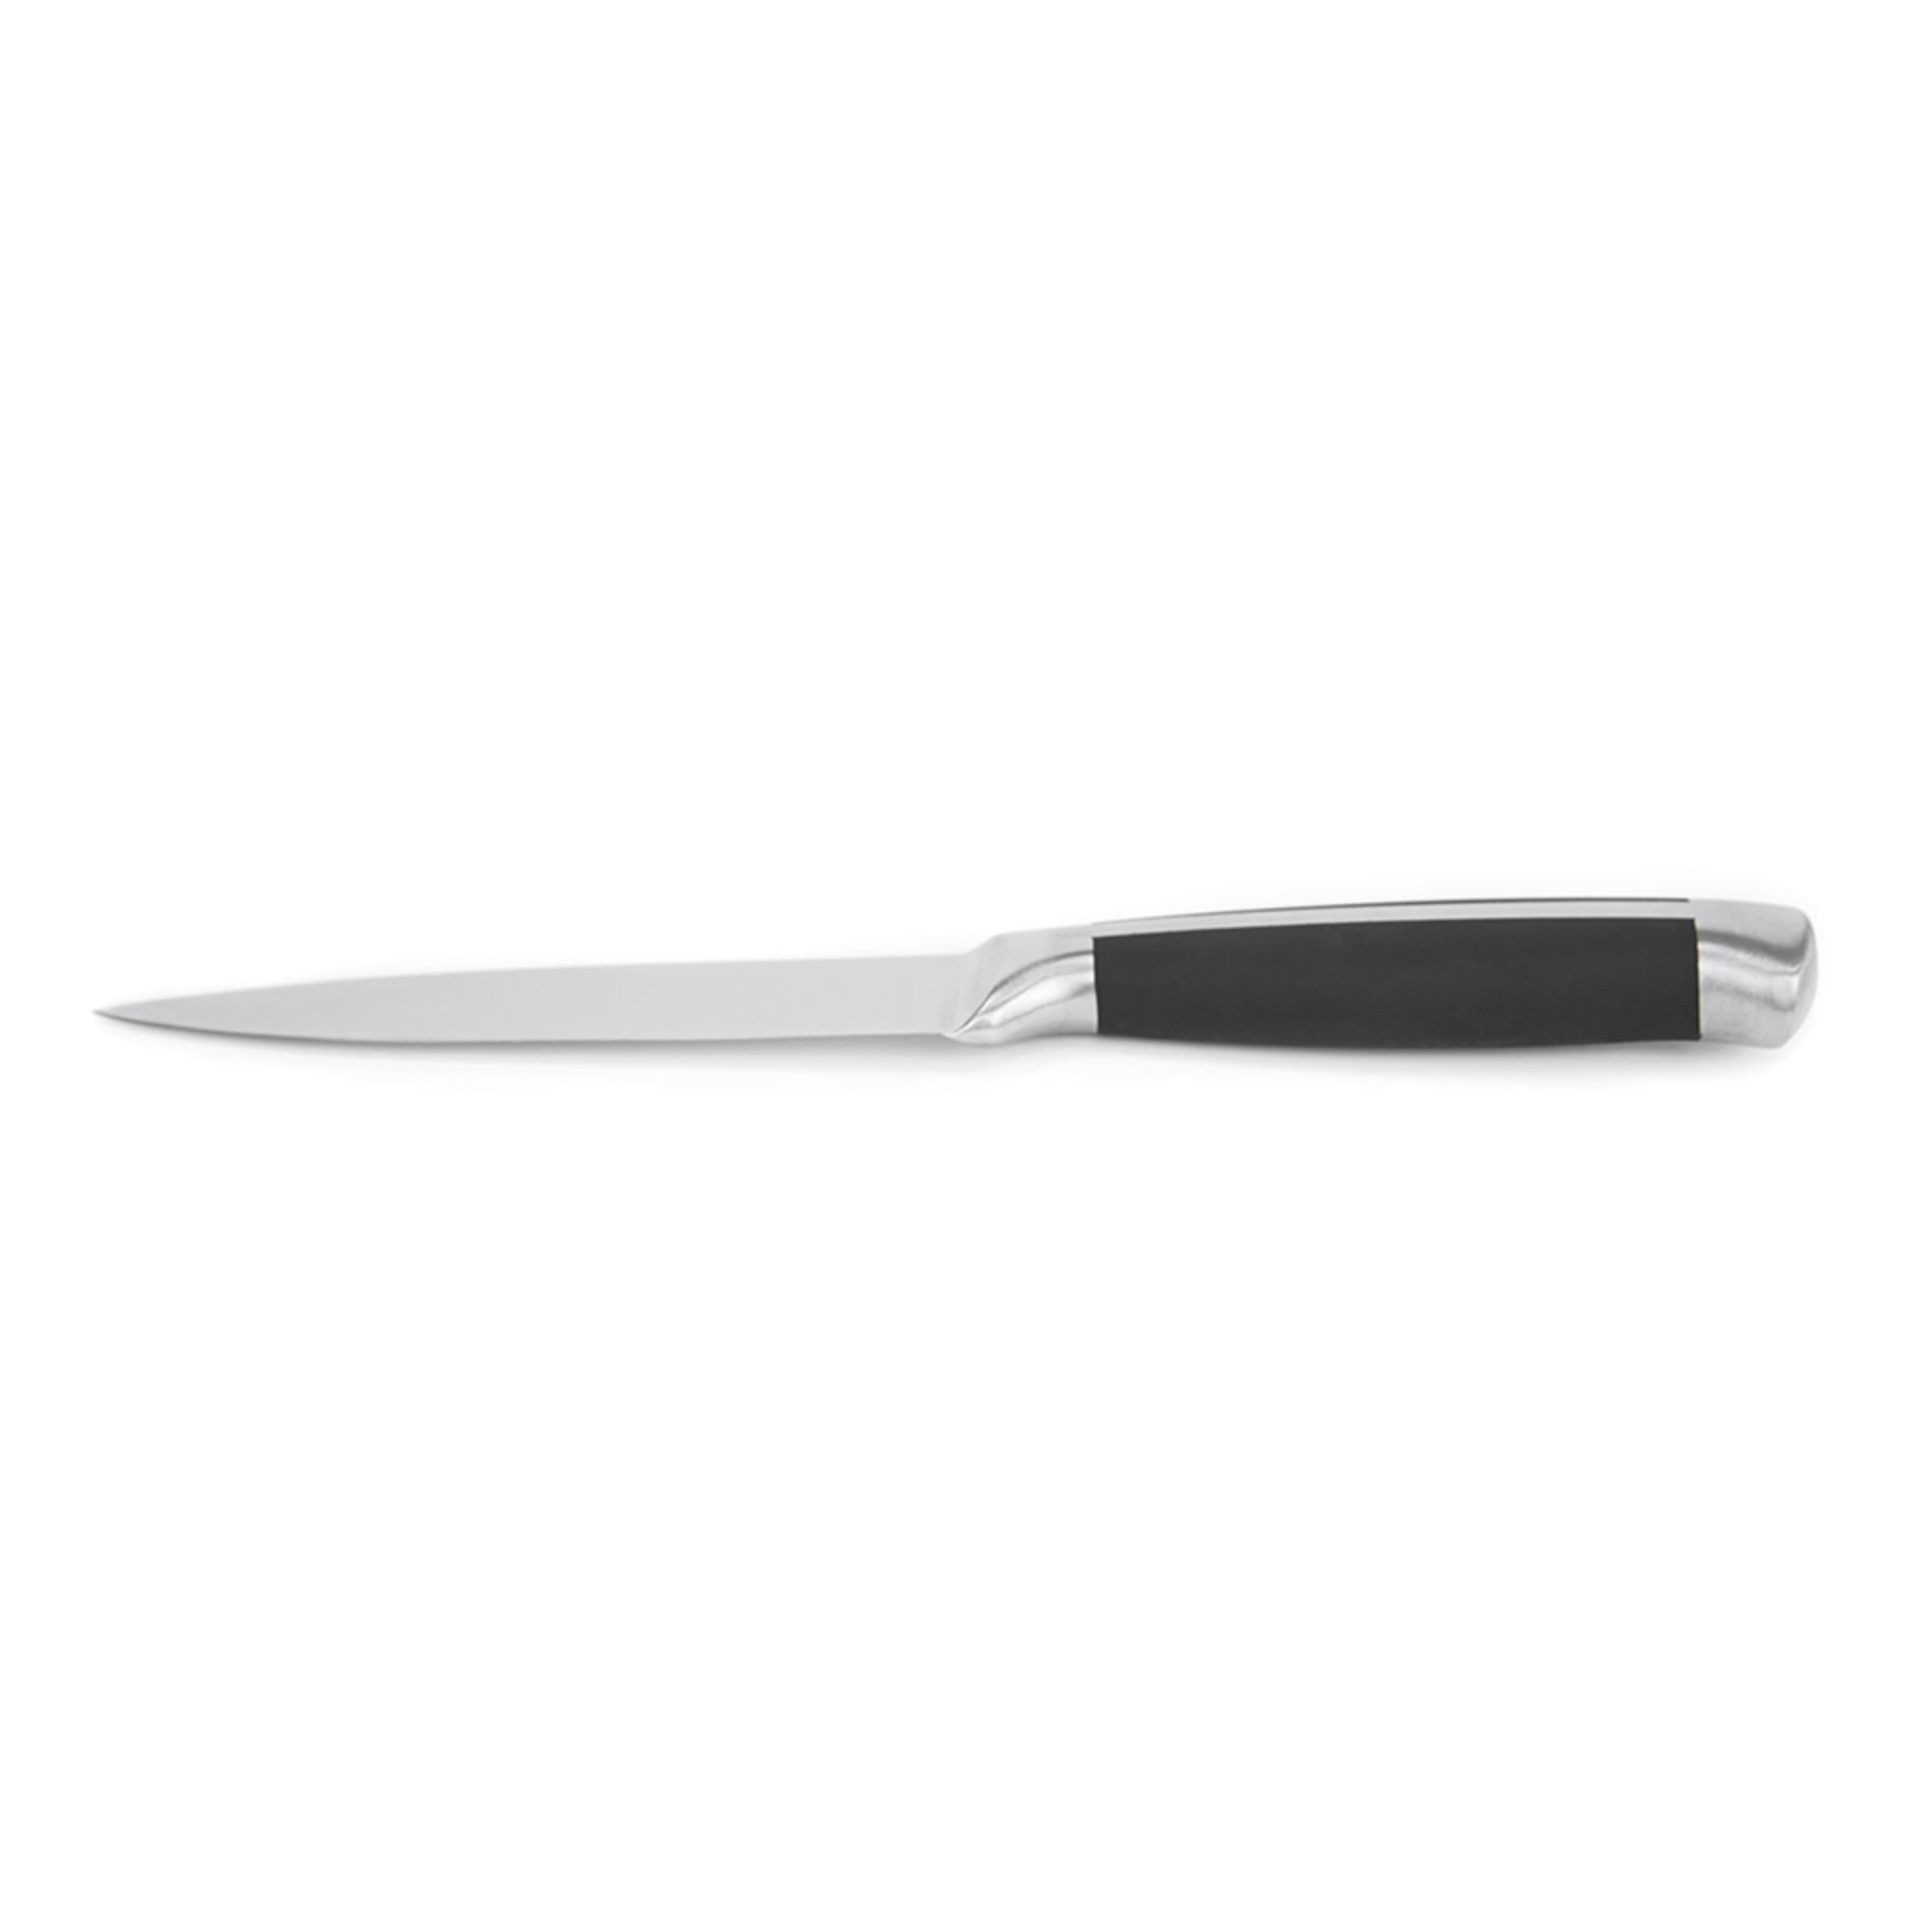 Home Basics Continental Collection 5"  Utility Knife $3.00 EACH, CASE PACK OF 24